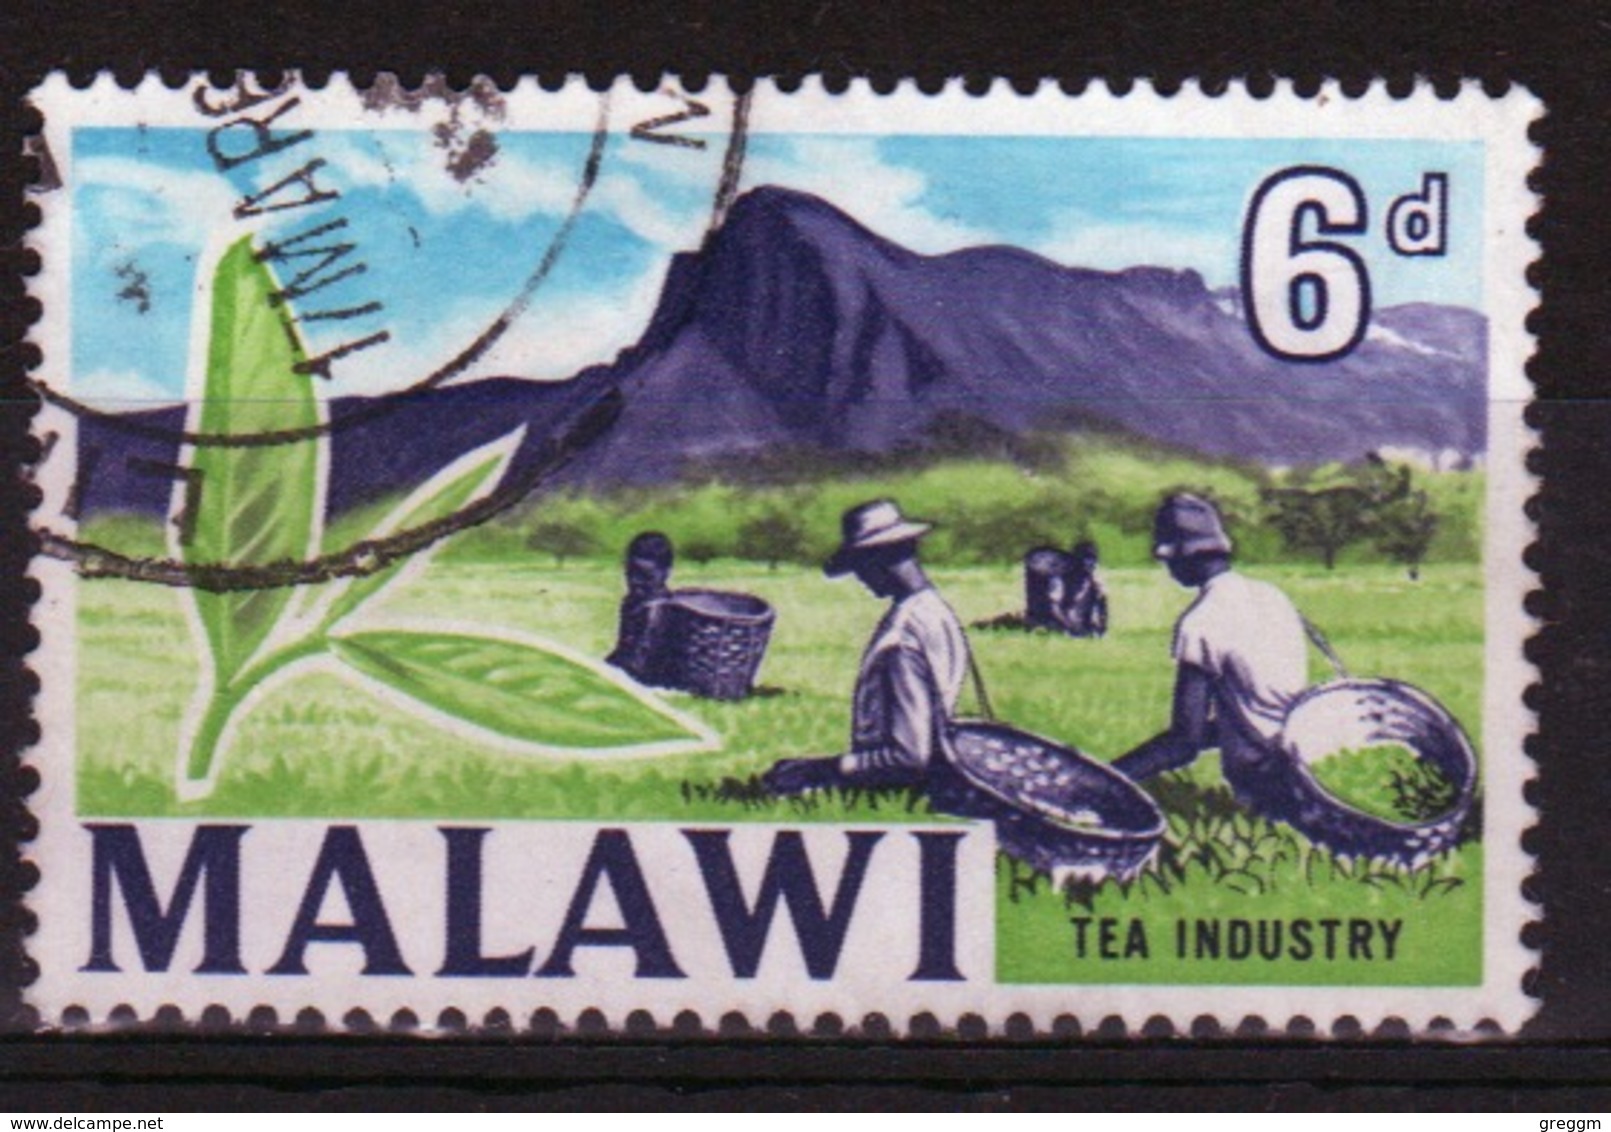 Malawi 1964 Single 6d Stamp From The Definitive Set. - Malawi (1964-...)